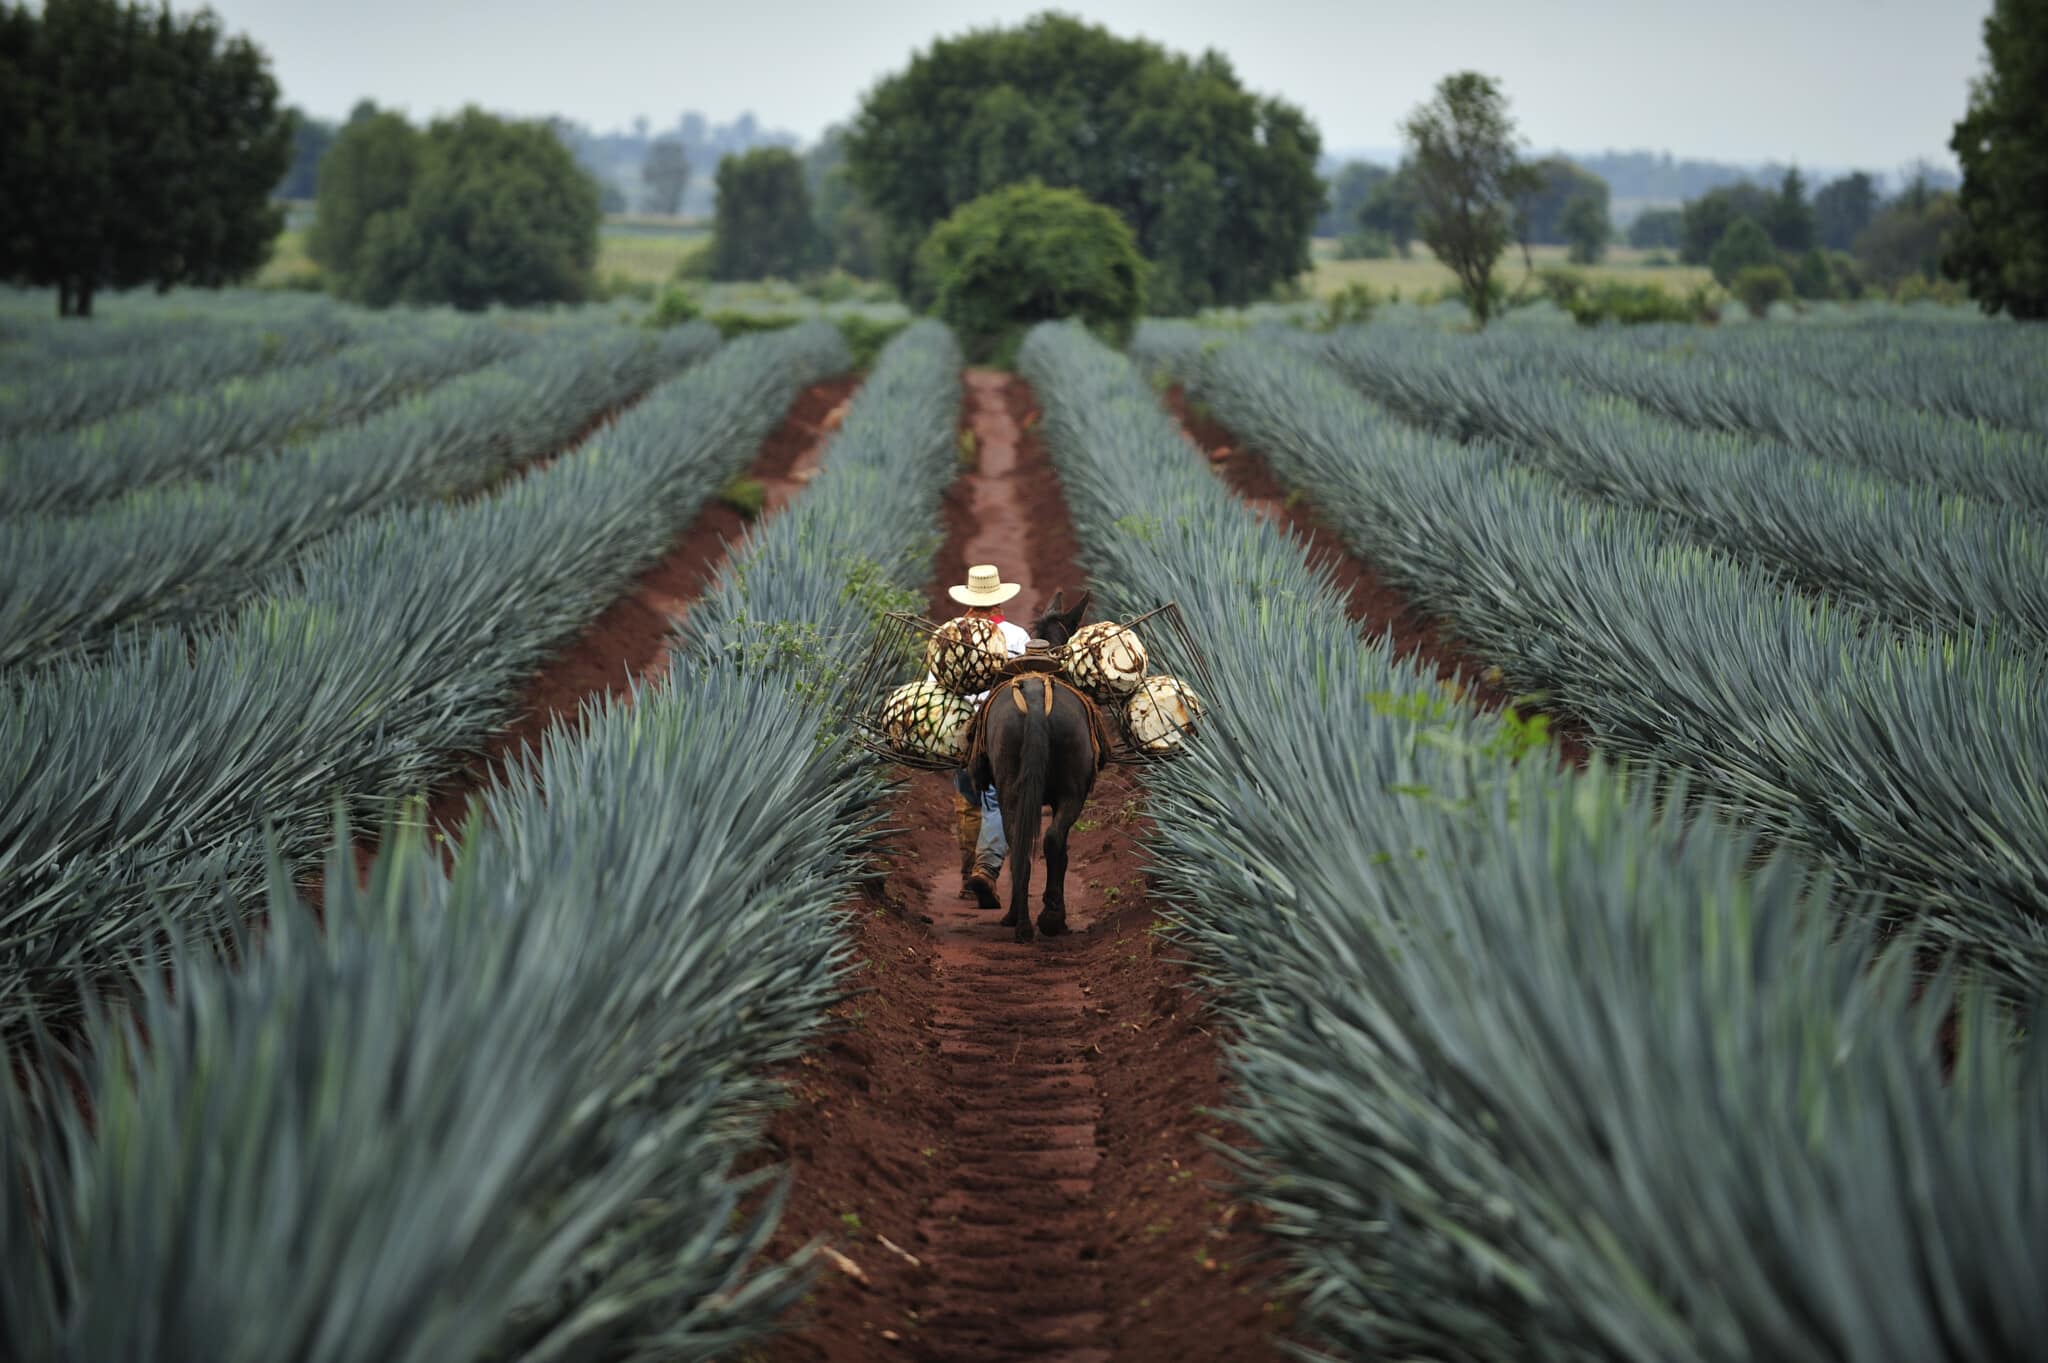 Man with donkey harvesting agave in a field in Tequila Jalisco Mexico